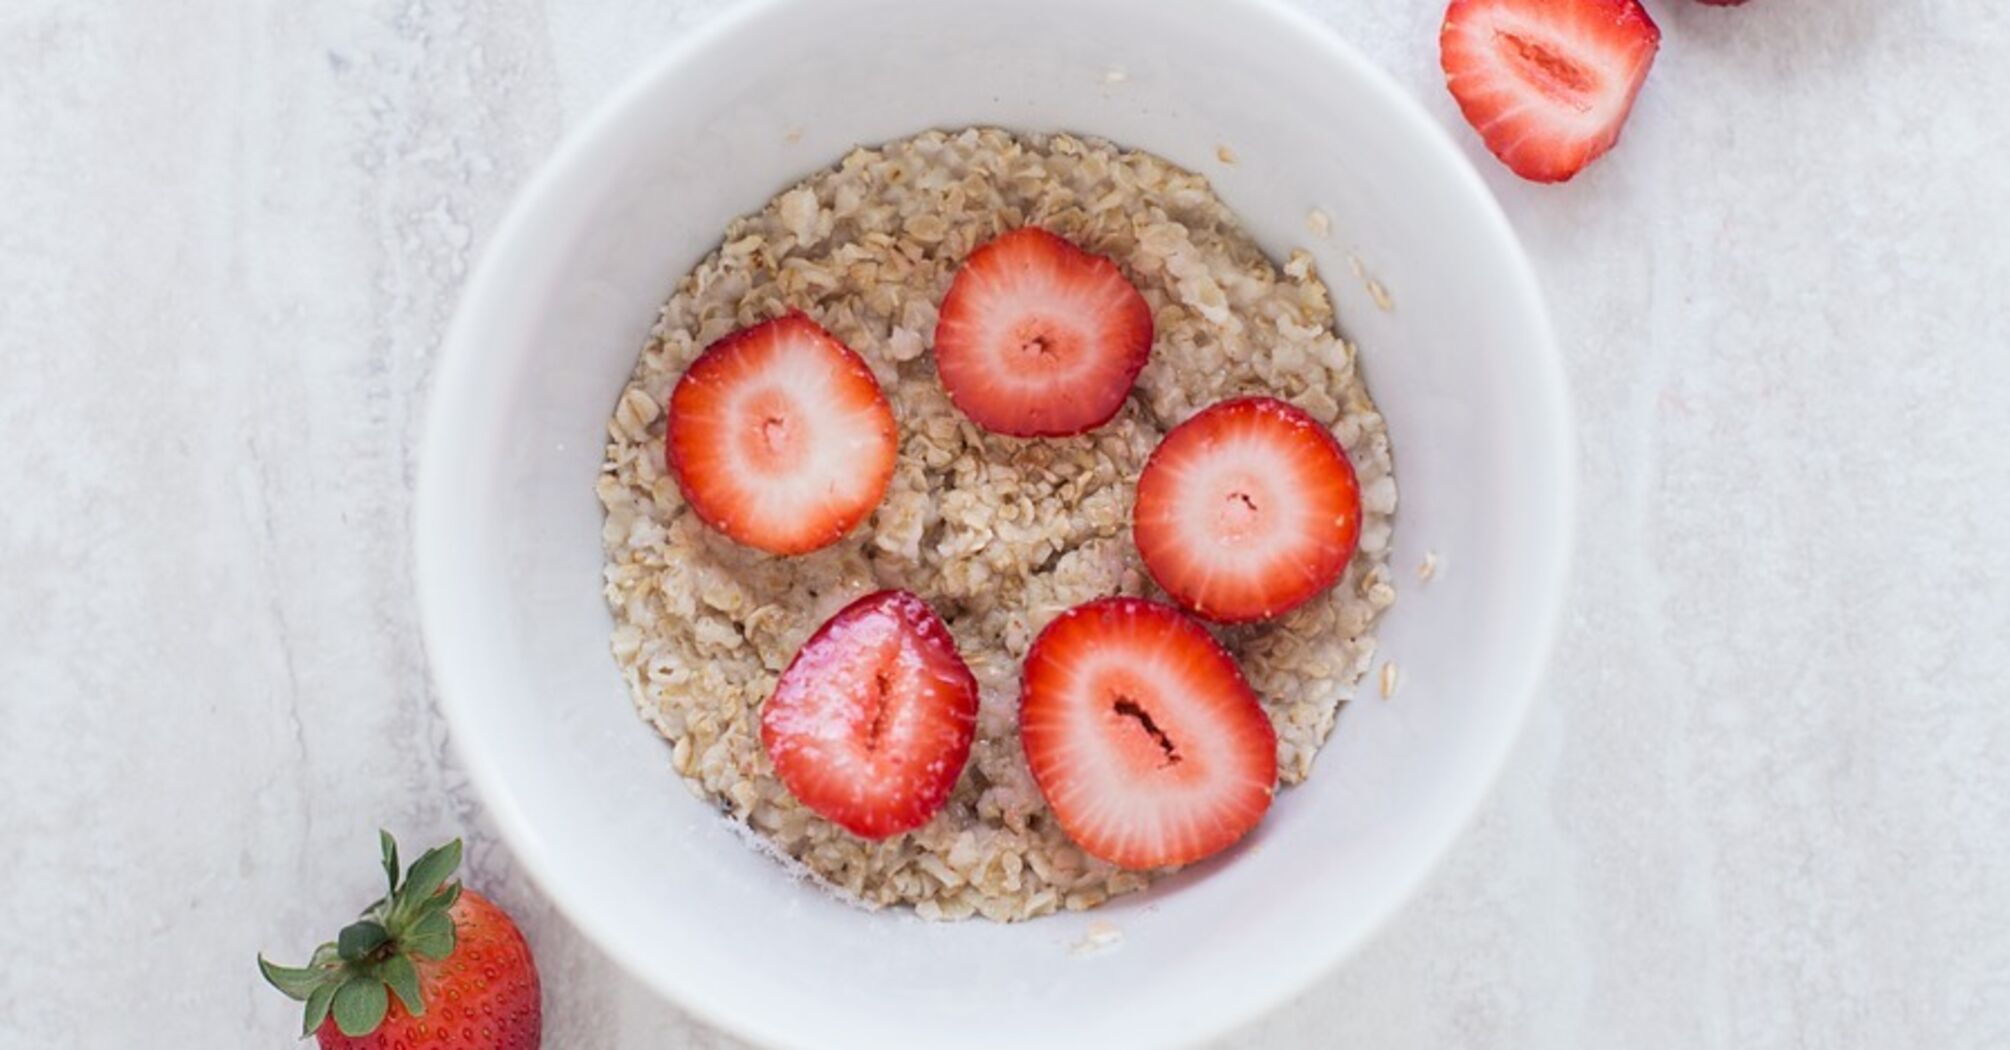 Oatmeal for breakfast in a new way: no need to cook